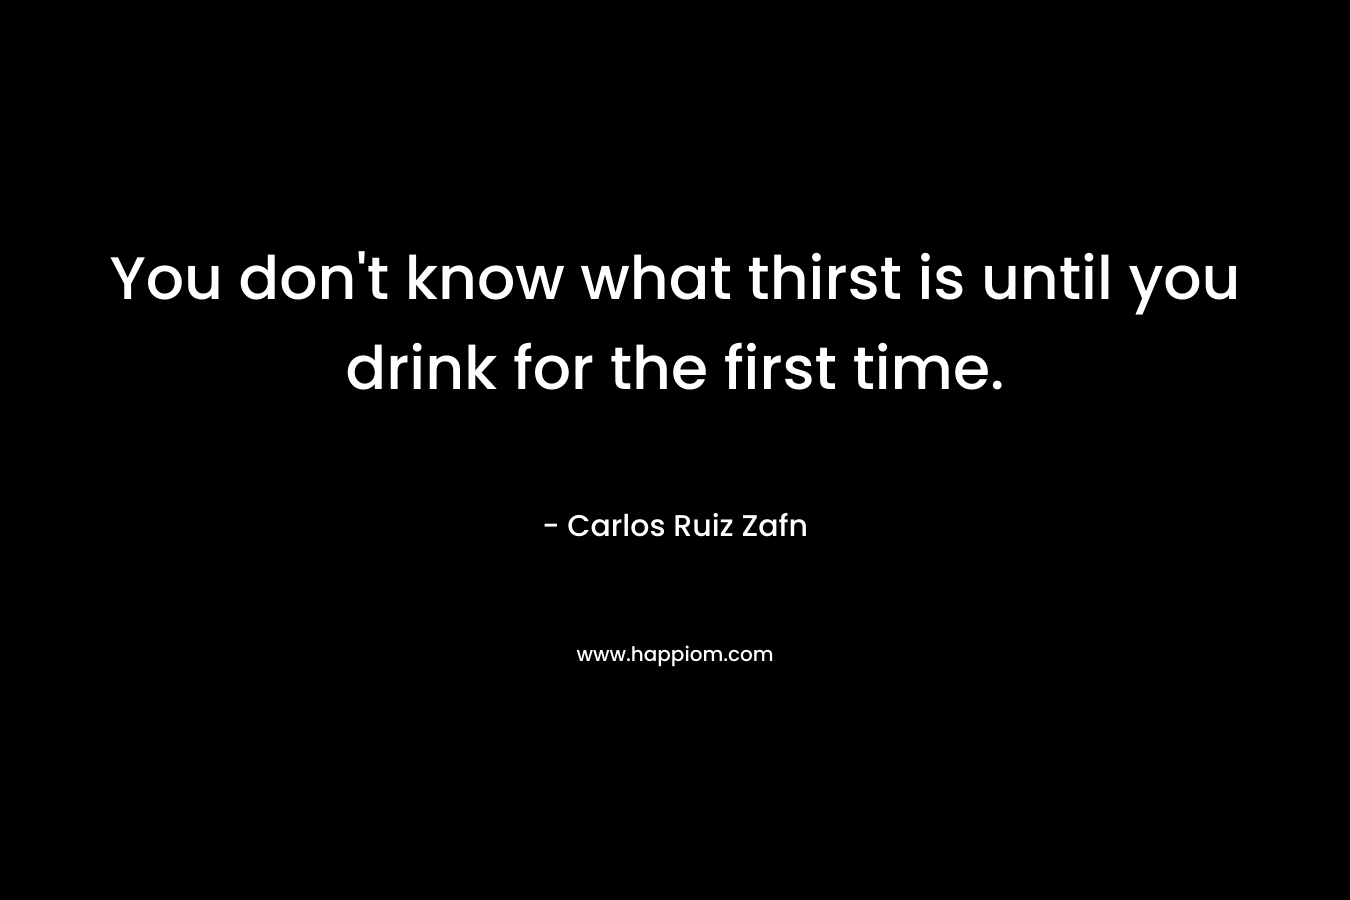 You don't know what thirst is until you drink for the first time.